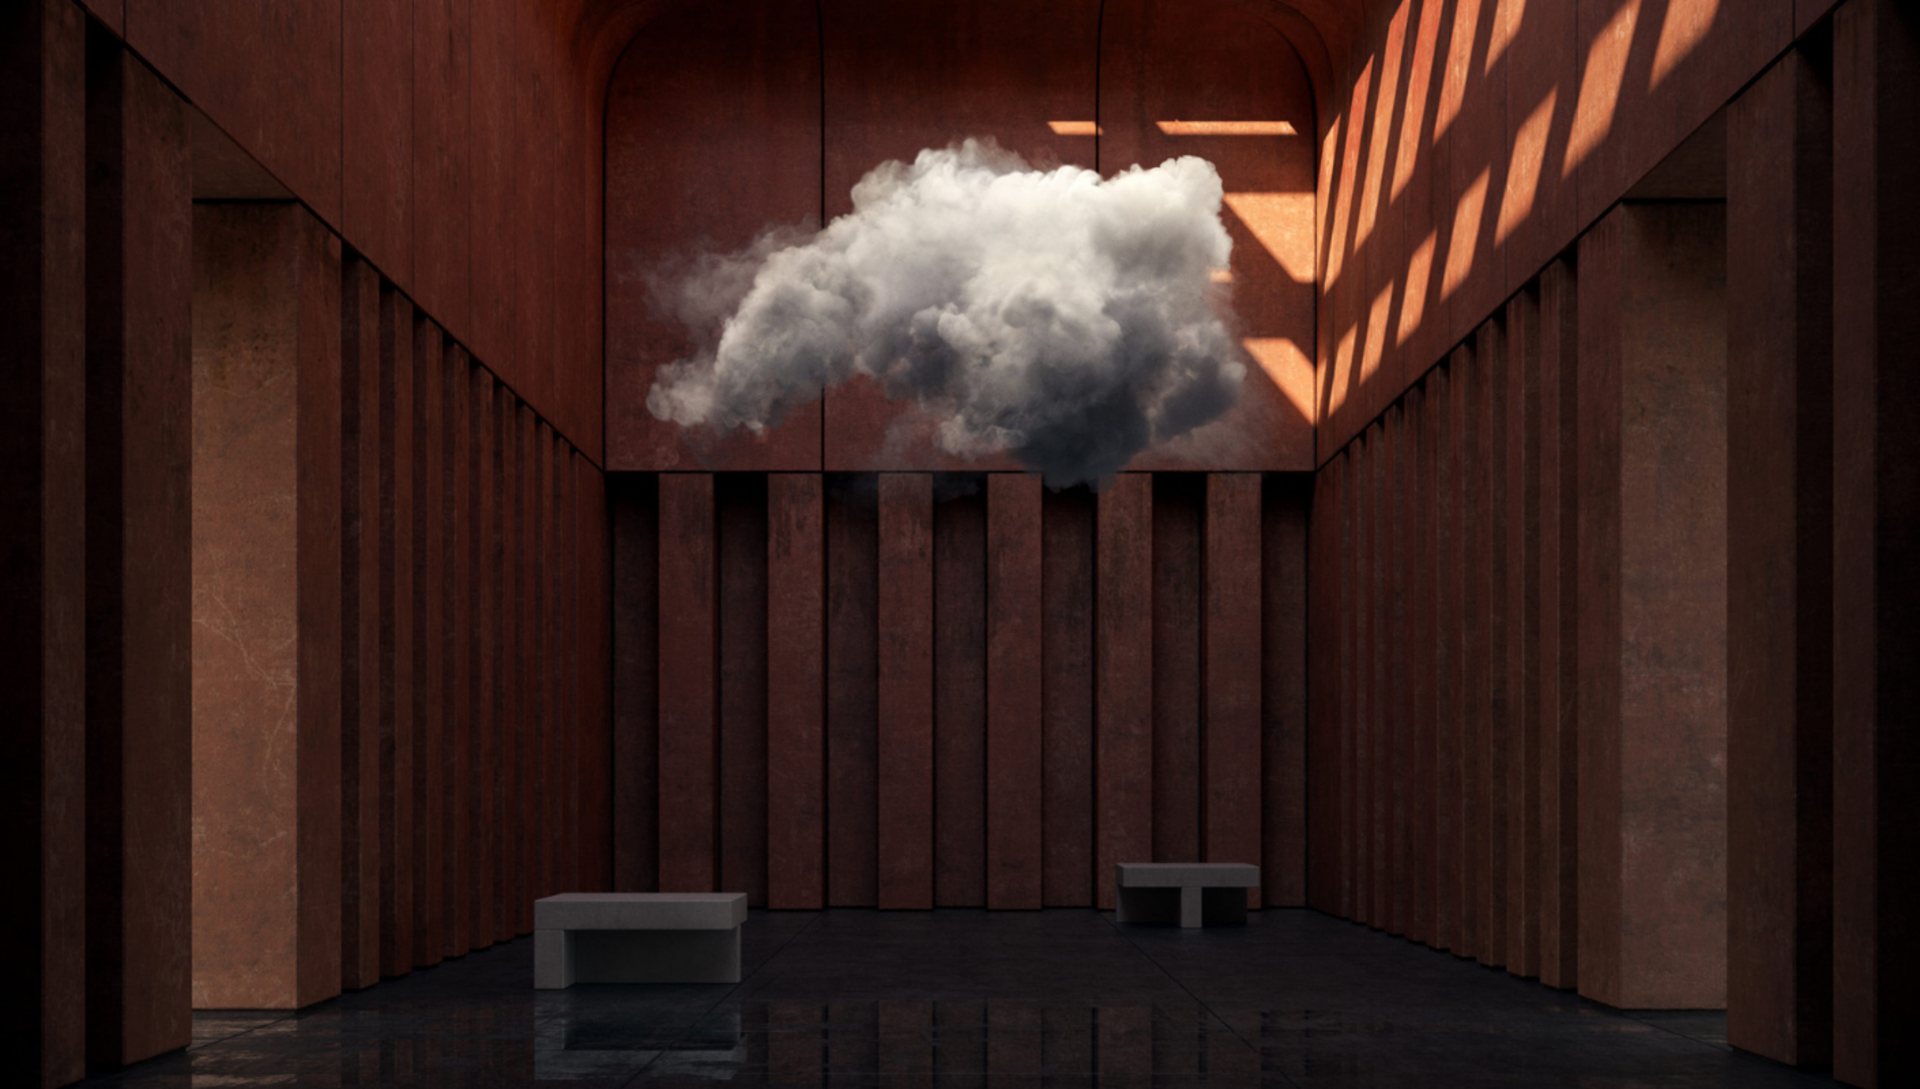 resized-S1_E1_Taming-A-Brutalist-Cloud-scaled-florin-botea.png